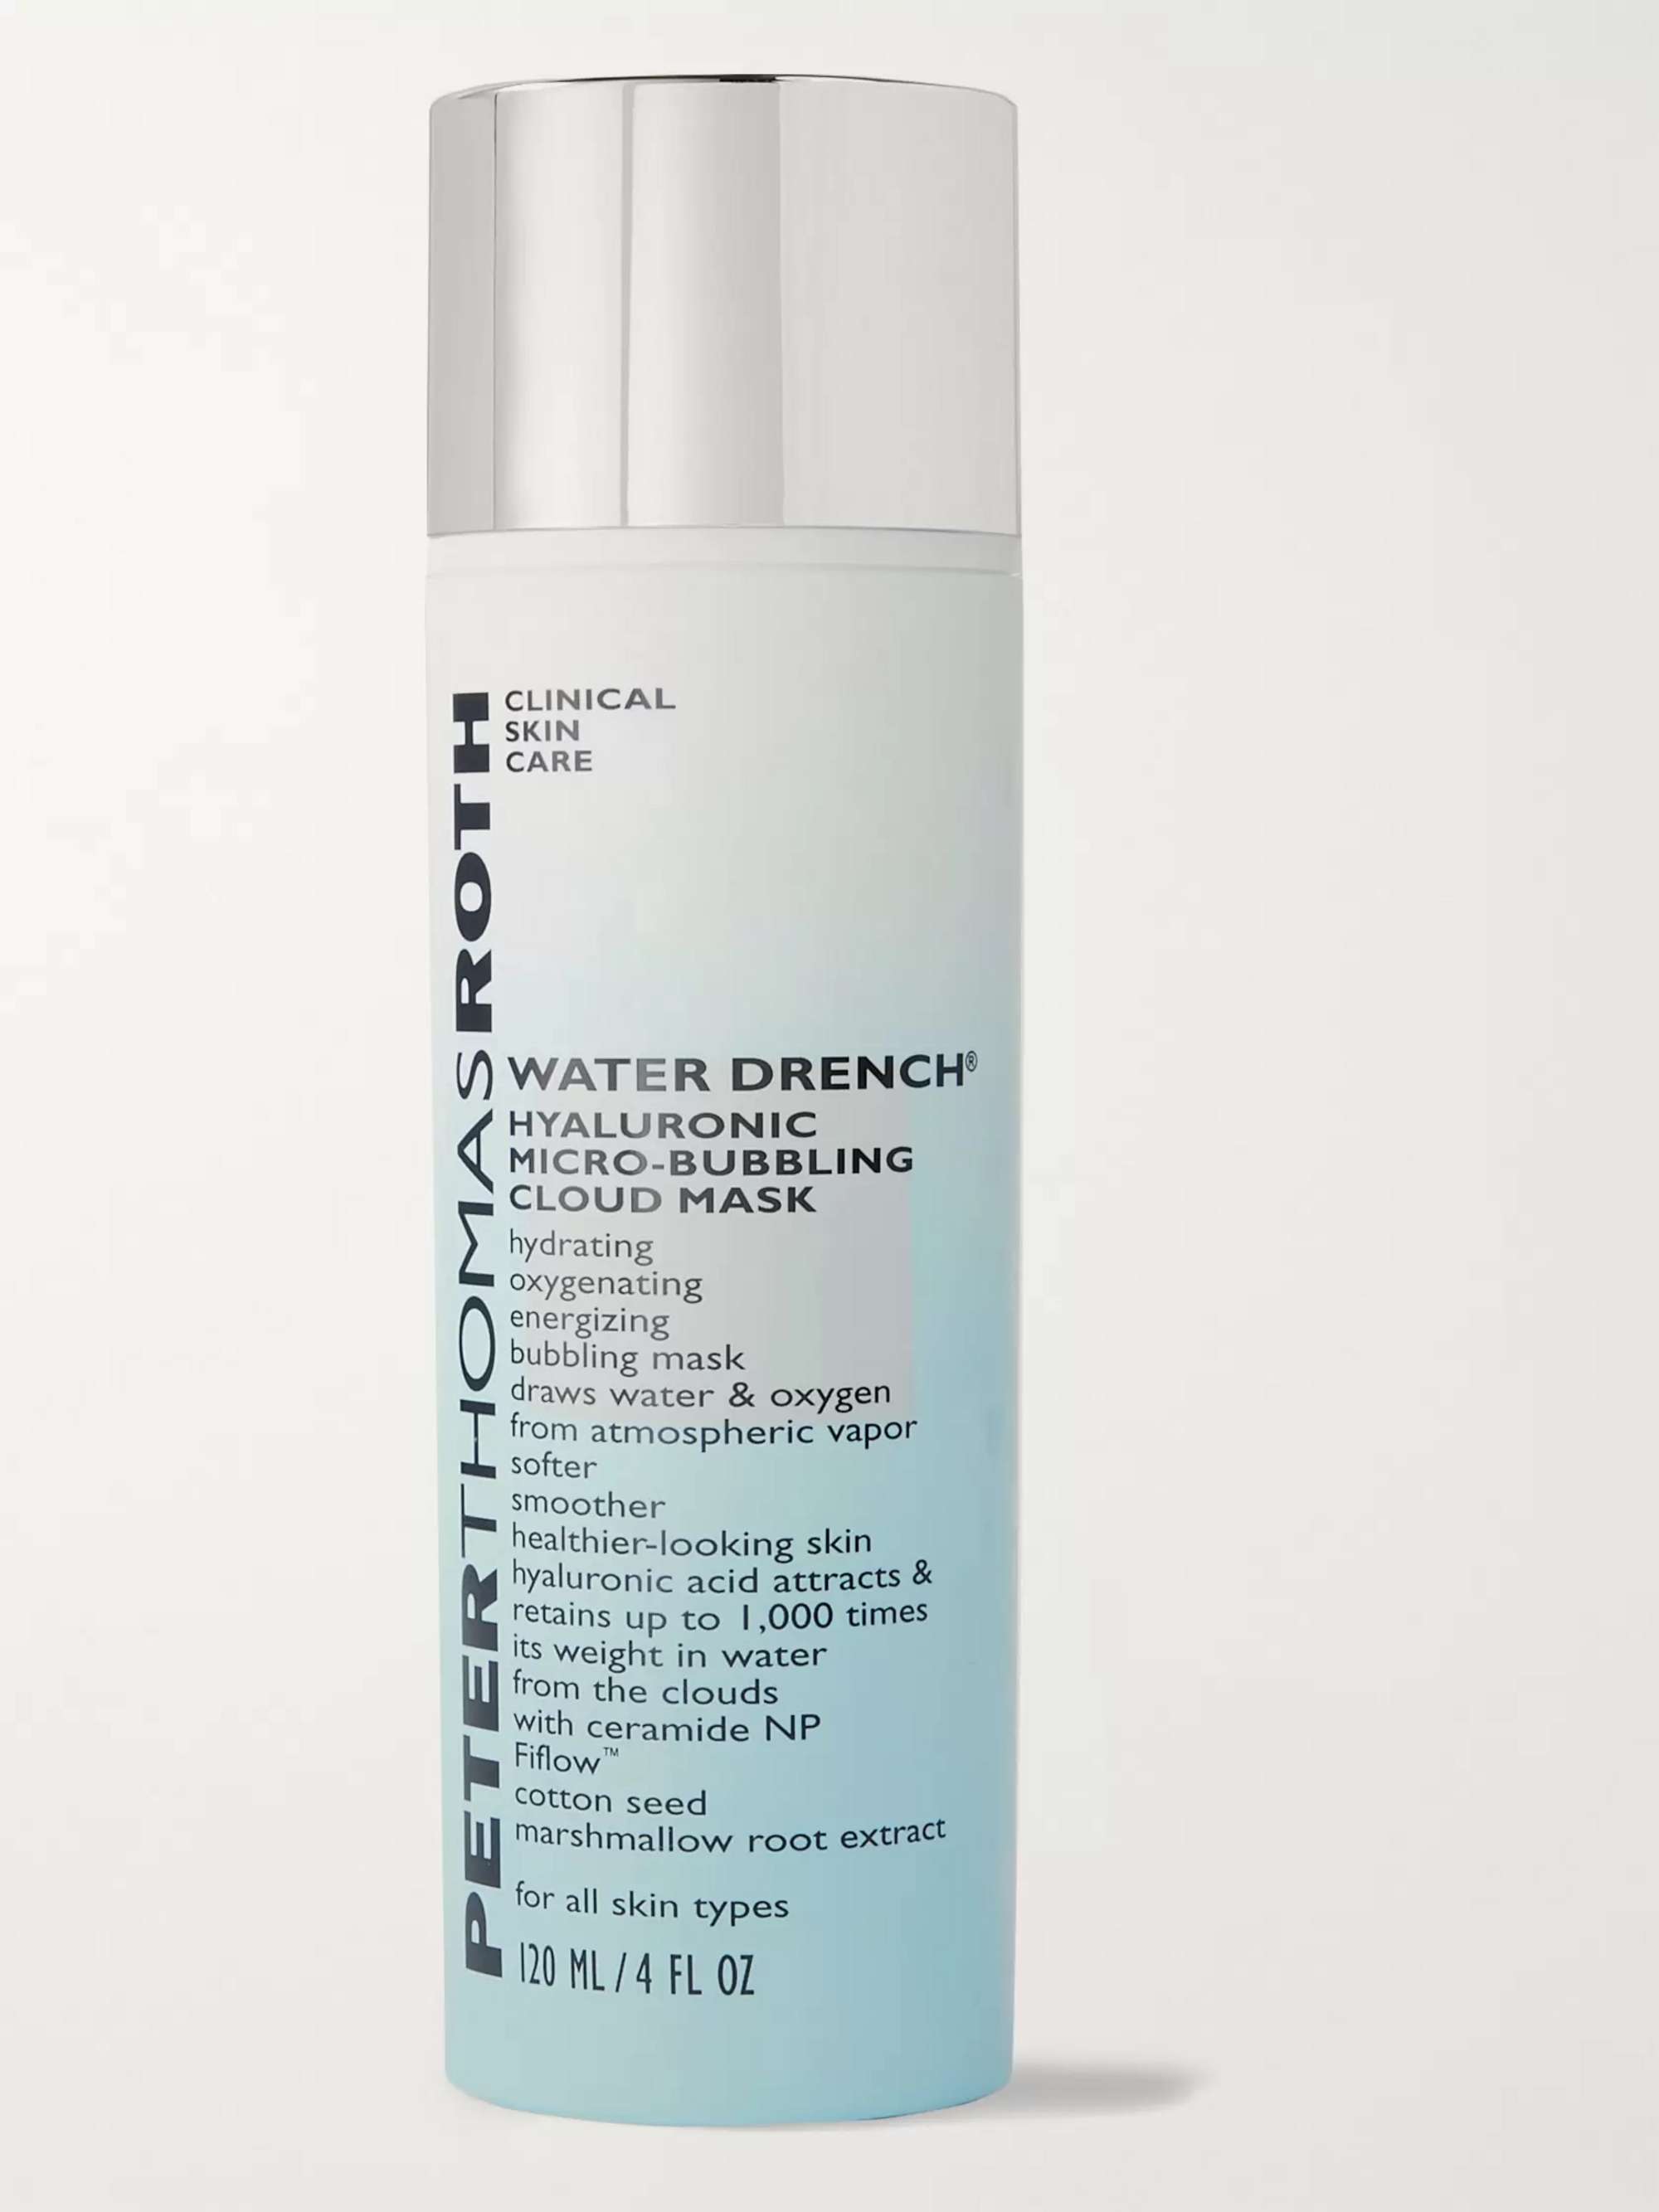 PETER THOMAS ROTH Water Drench Hyaluronic Micro-Bubbling Cloud Mask, 120ml